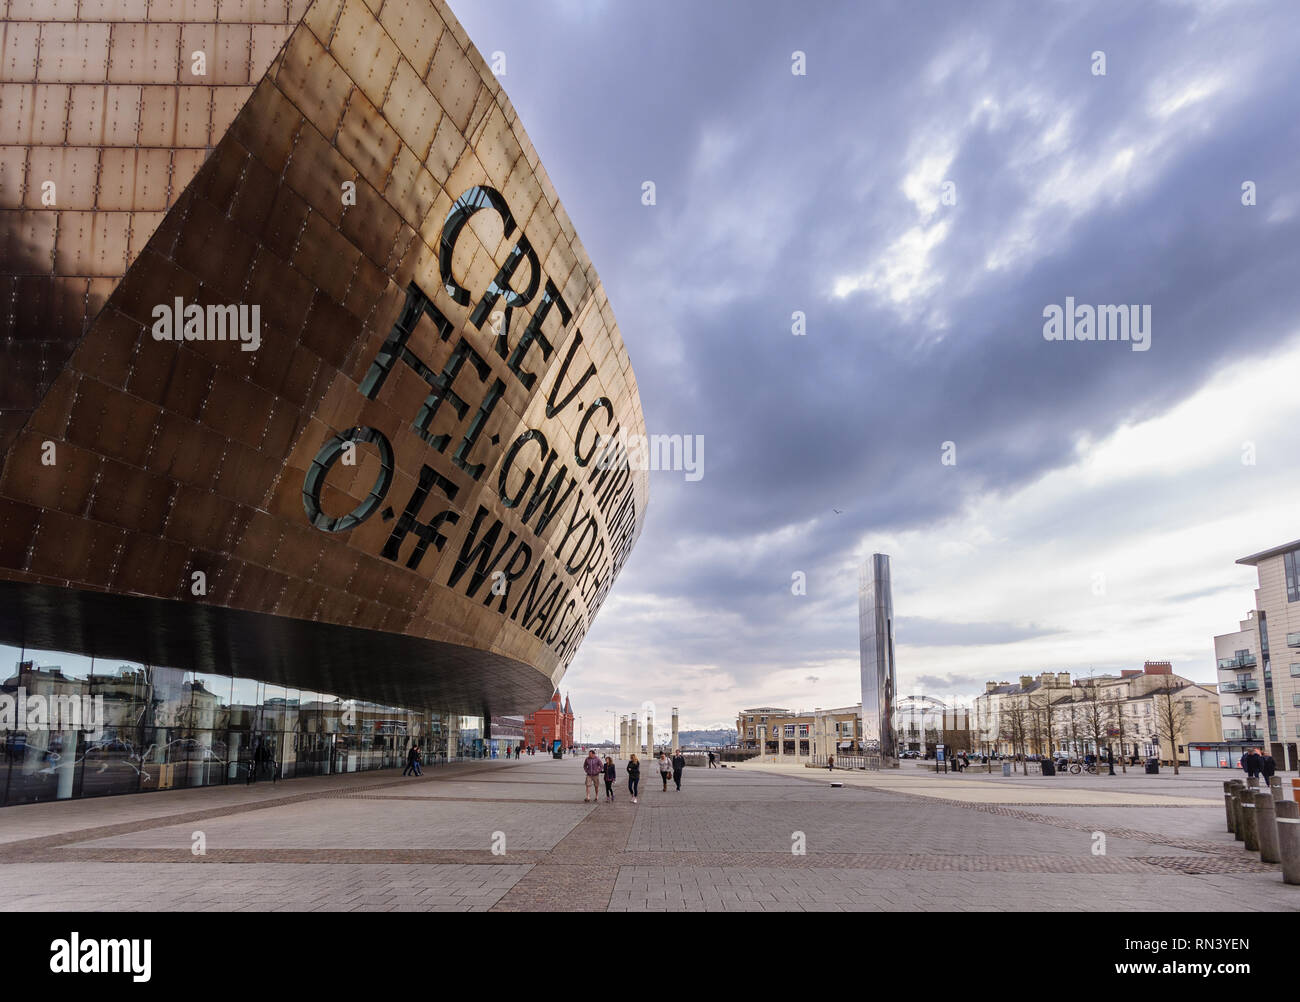 Cardiff, Wales, UK - March 17, 2013: The distinctive modern architecture of Cardiff's Millennium Centre theatre dominates Roald Dahl Plas in the city' Stock Photo